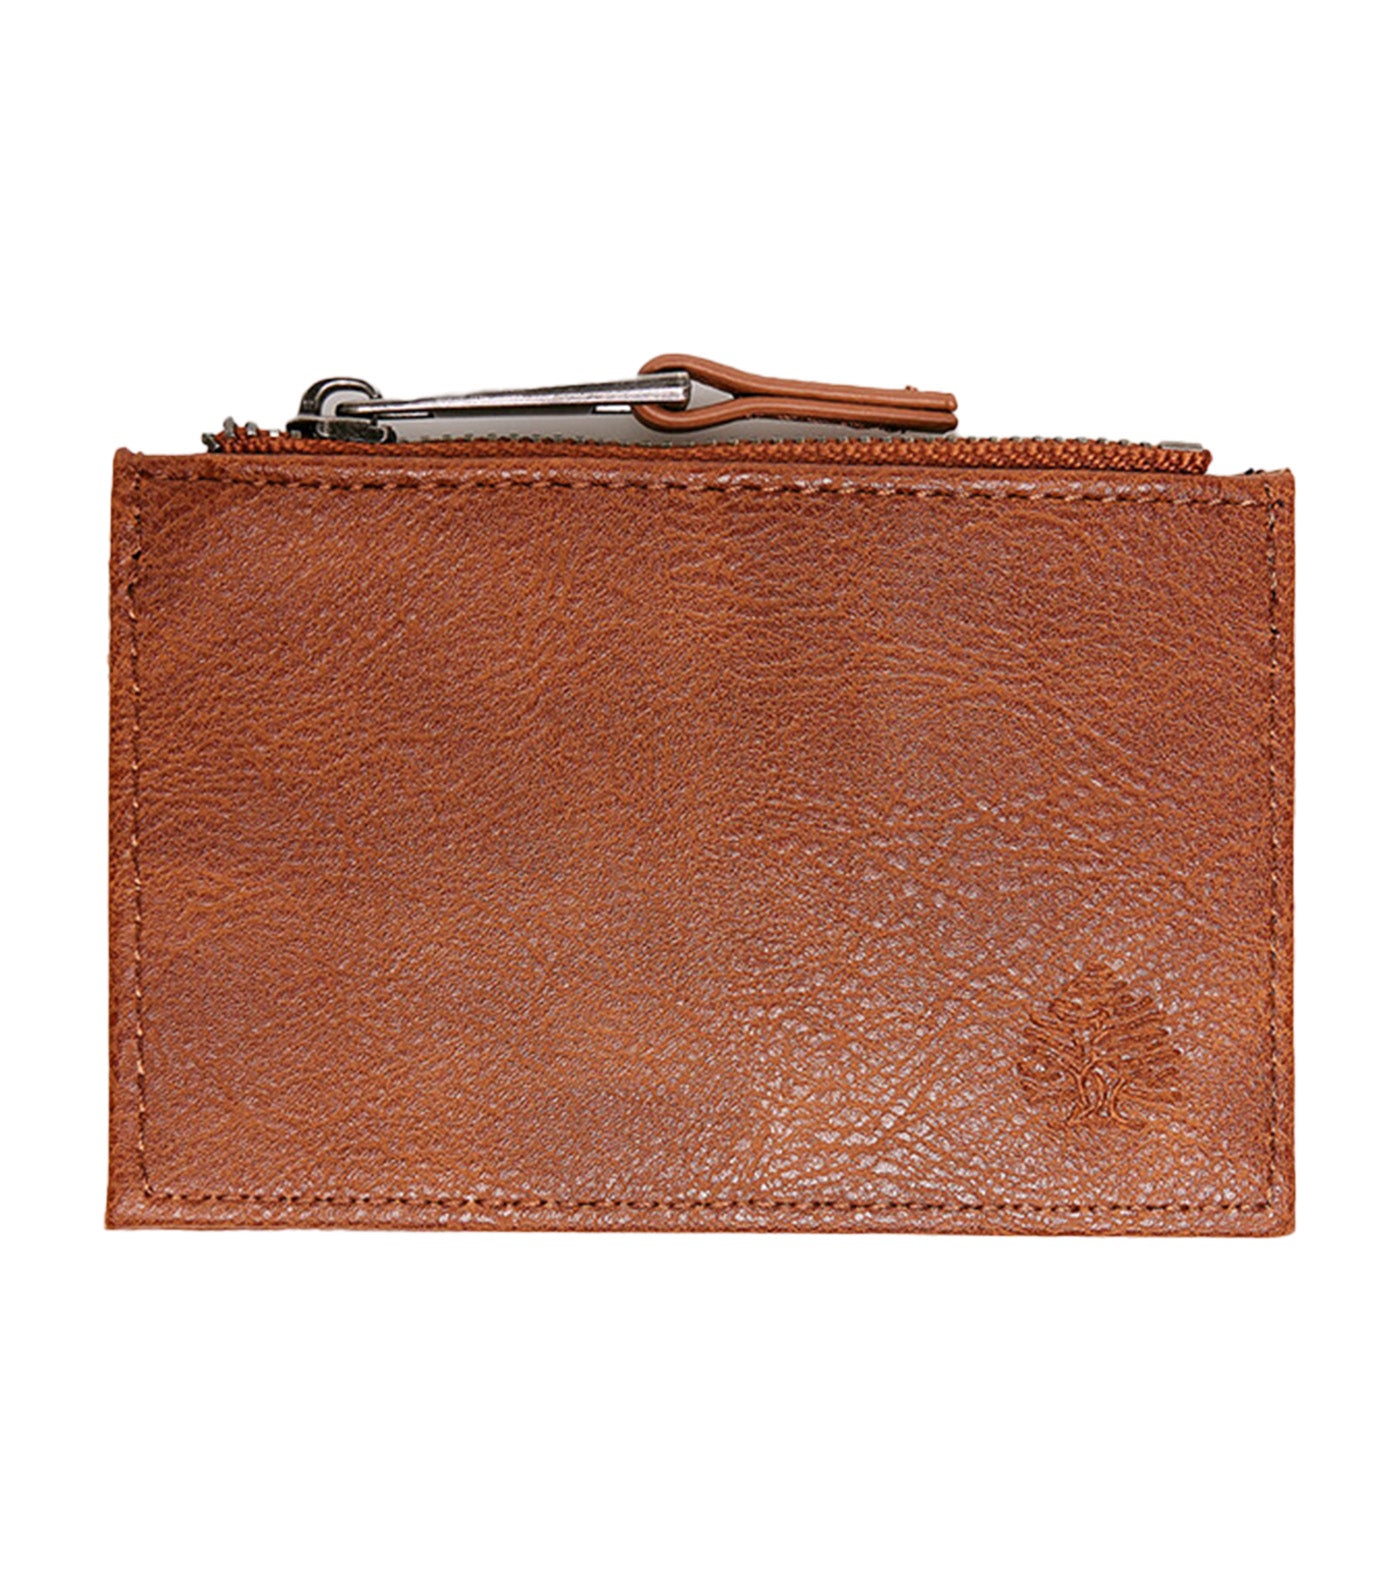 Leather Effect Card Holder Purse Tan